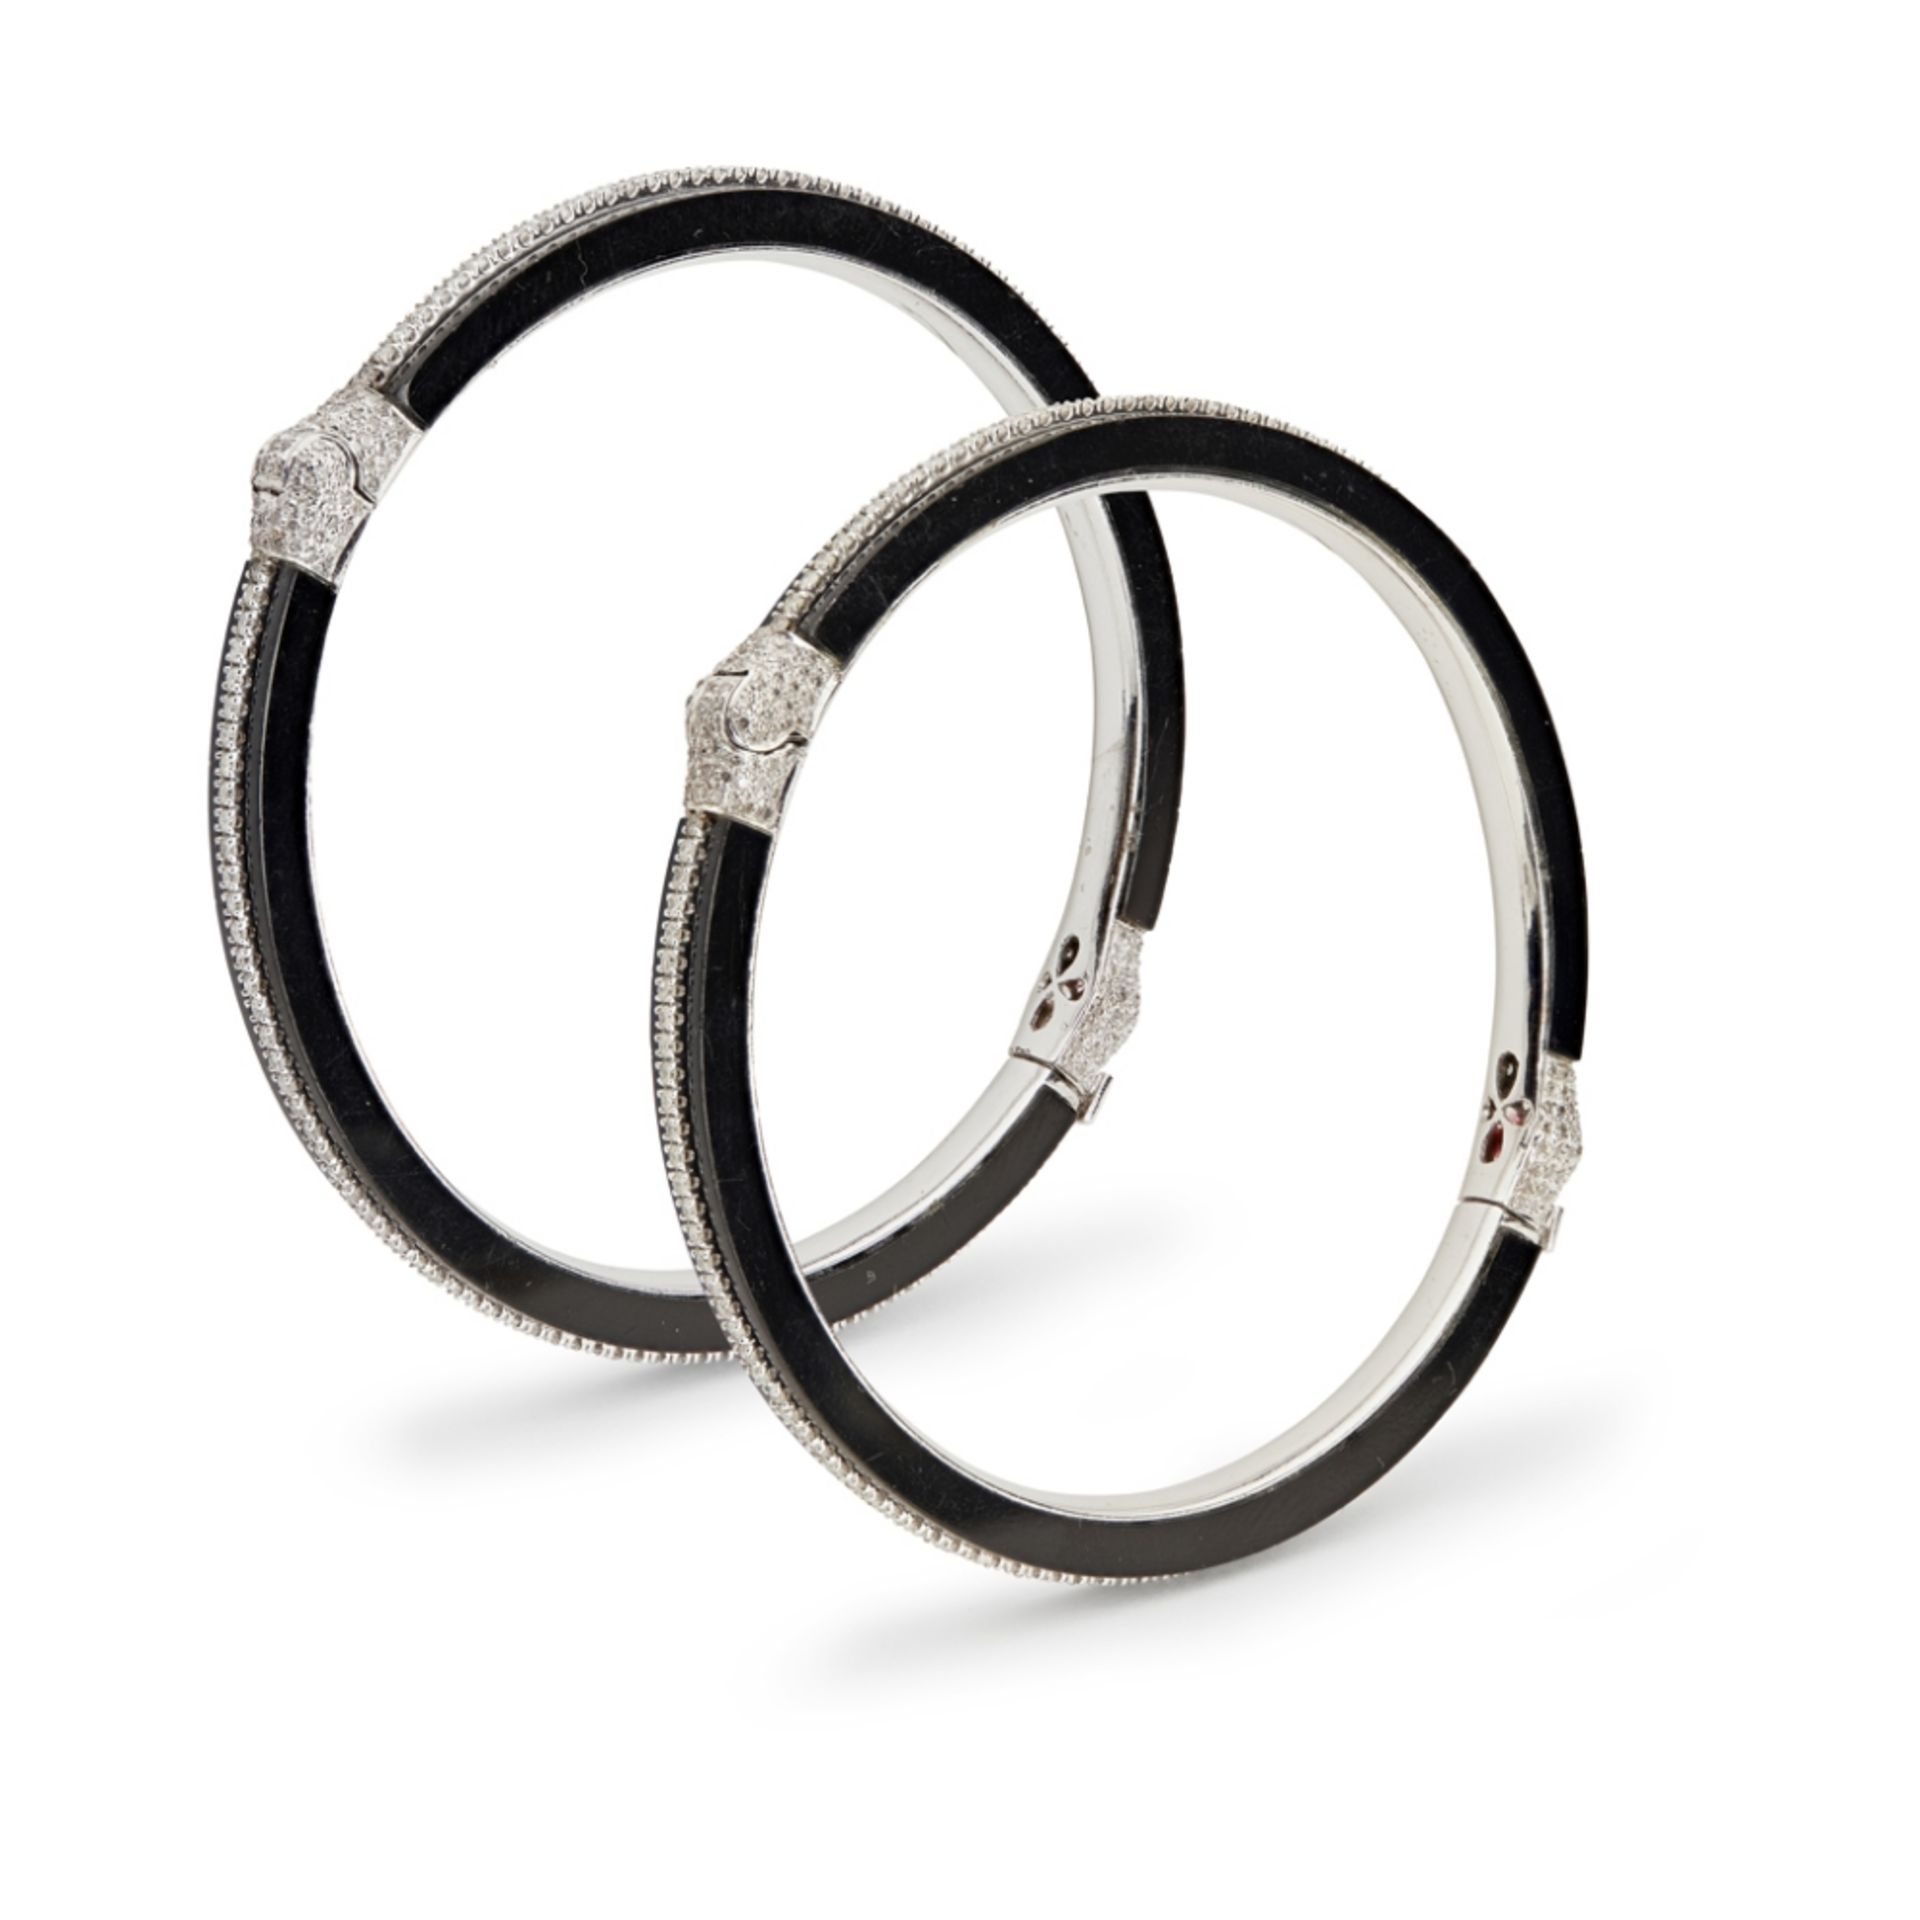 A pair of onyx and diamond set banglesboth of hinged design, set with a single row of small round